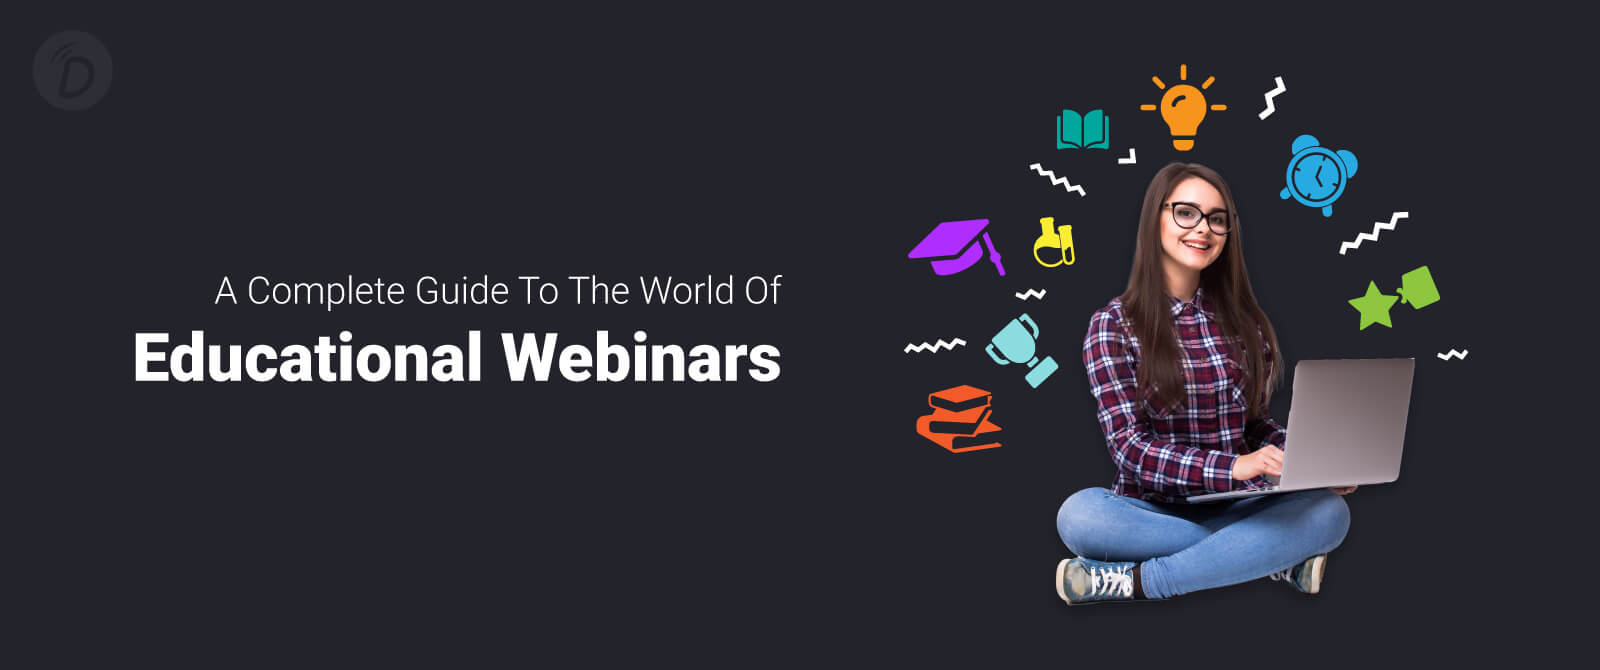 A Complete Guide to the World of Educational Webinars